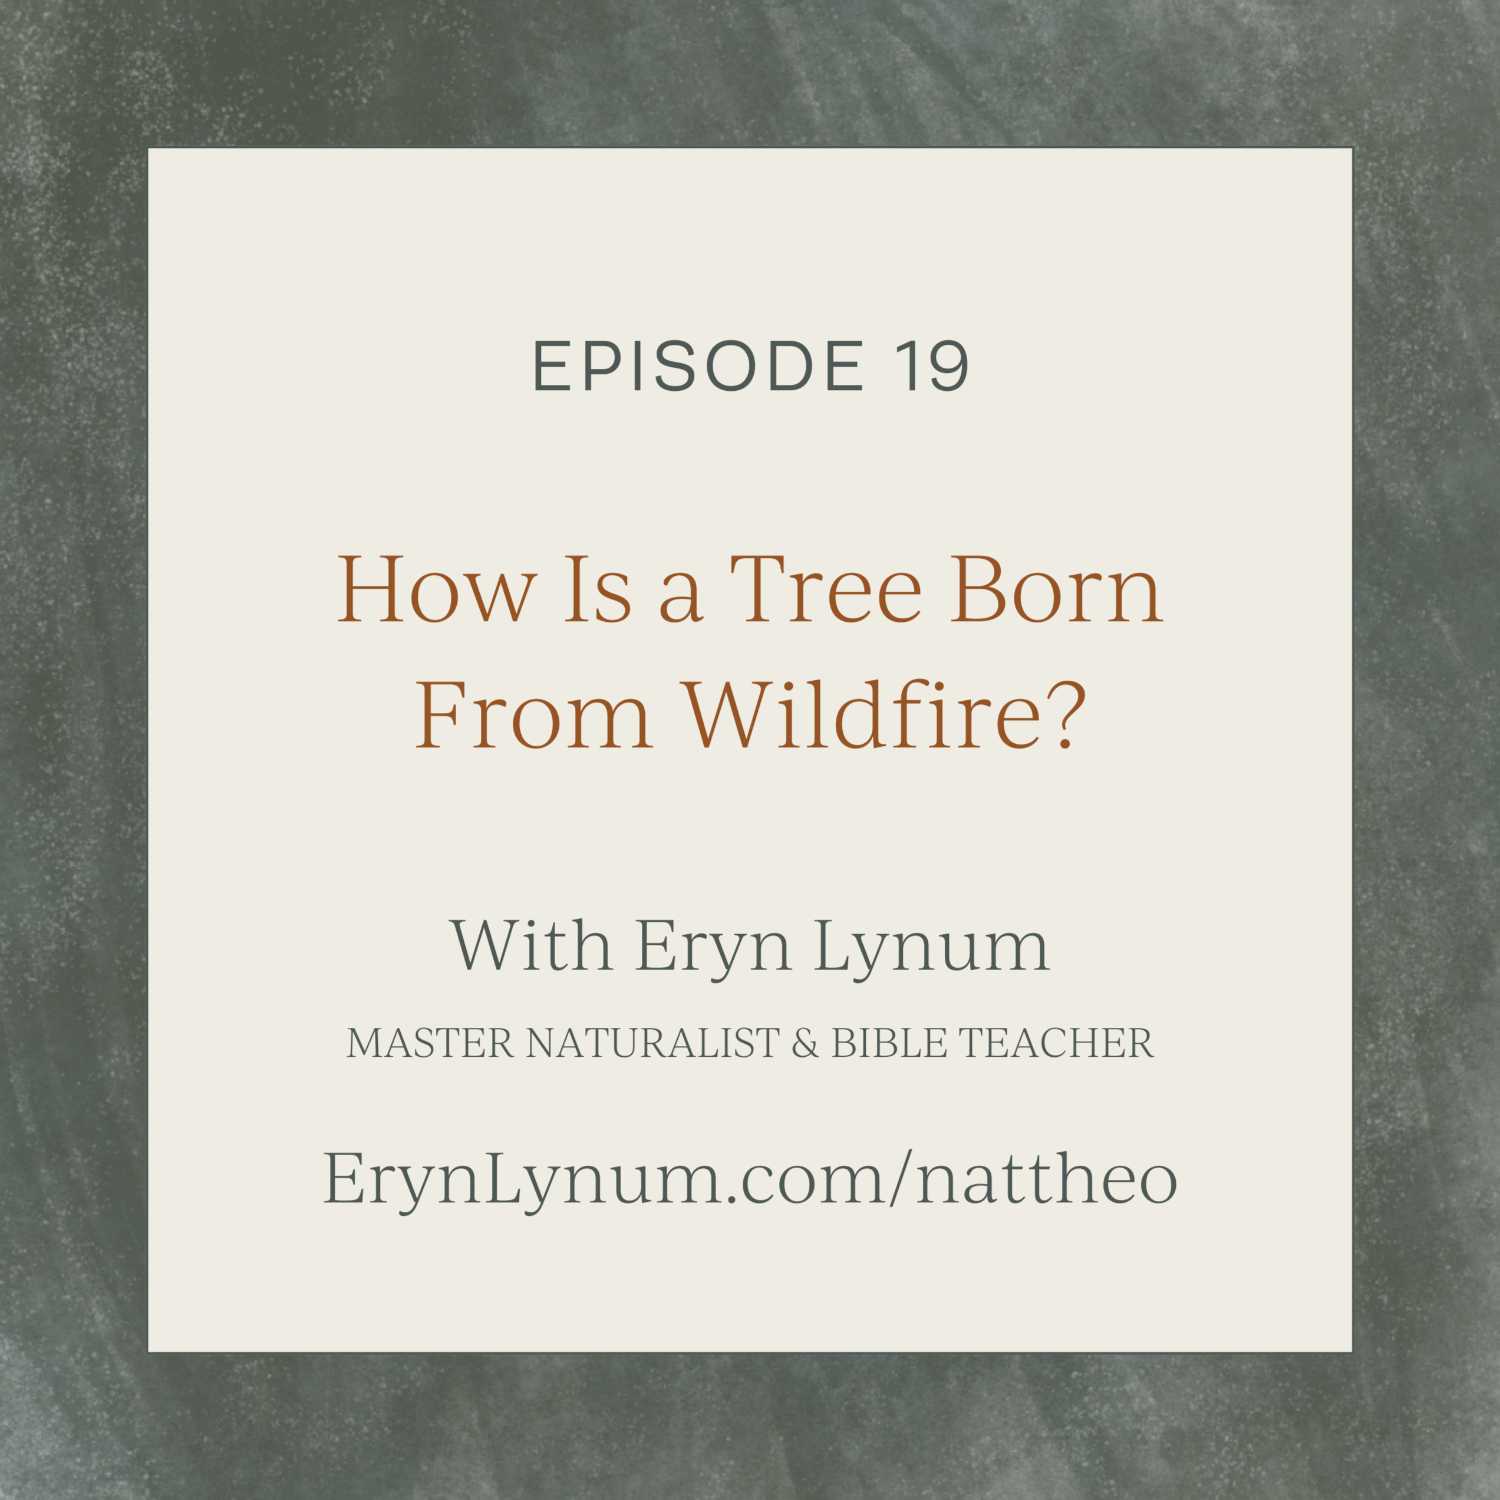 How Is a Tree Born From Wildfire? Episode 19